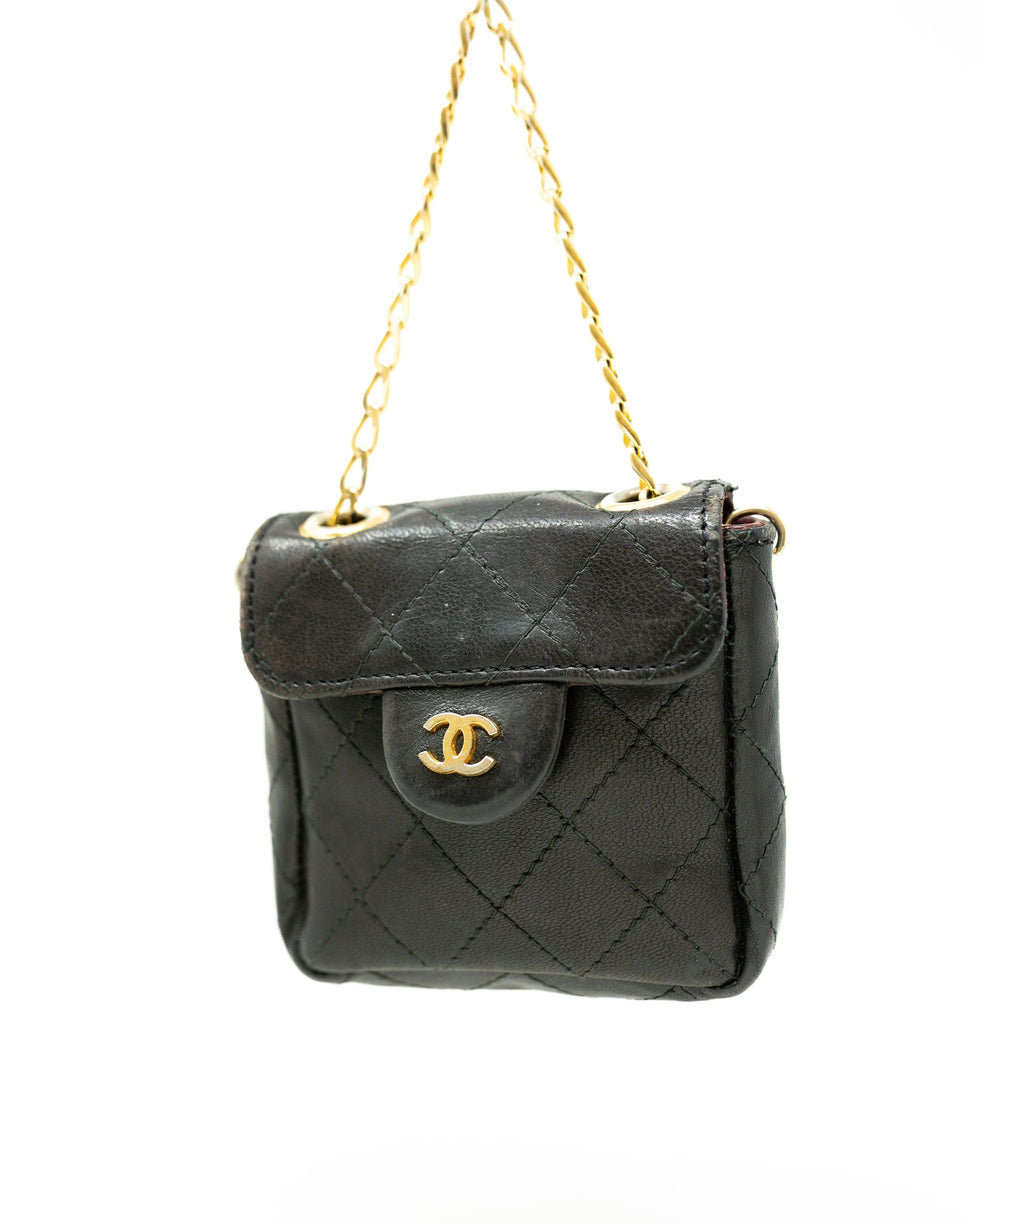 Chanel 255 Reissue Vintage Lambskin Chain Belt With Micro Mini Flap Bag   Labellov  Buy and Sell Authentic Luxury